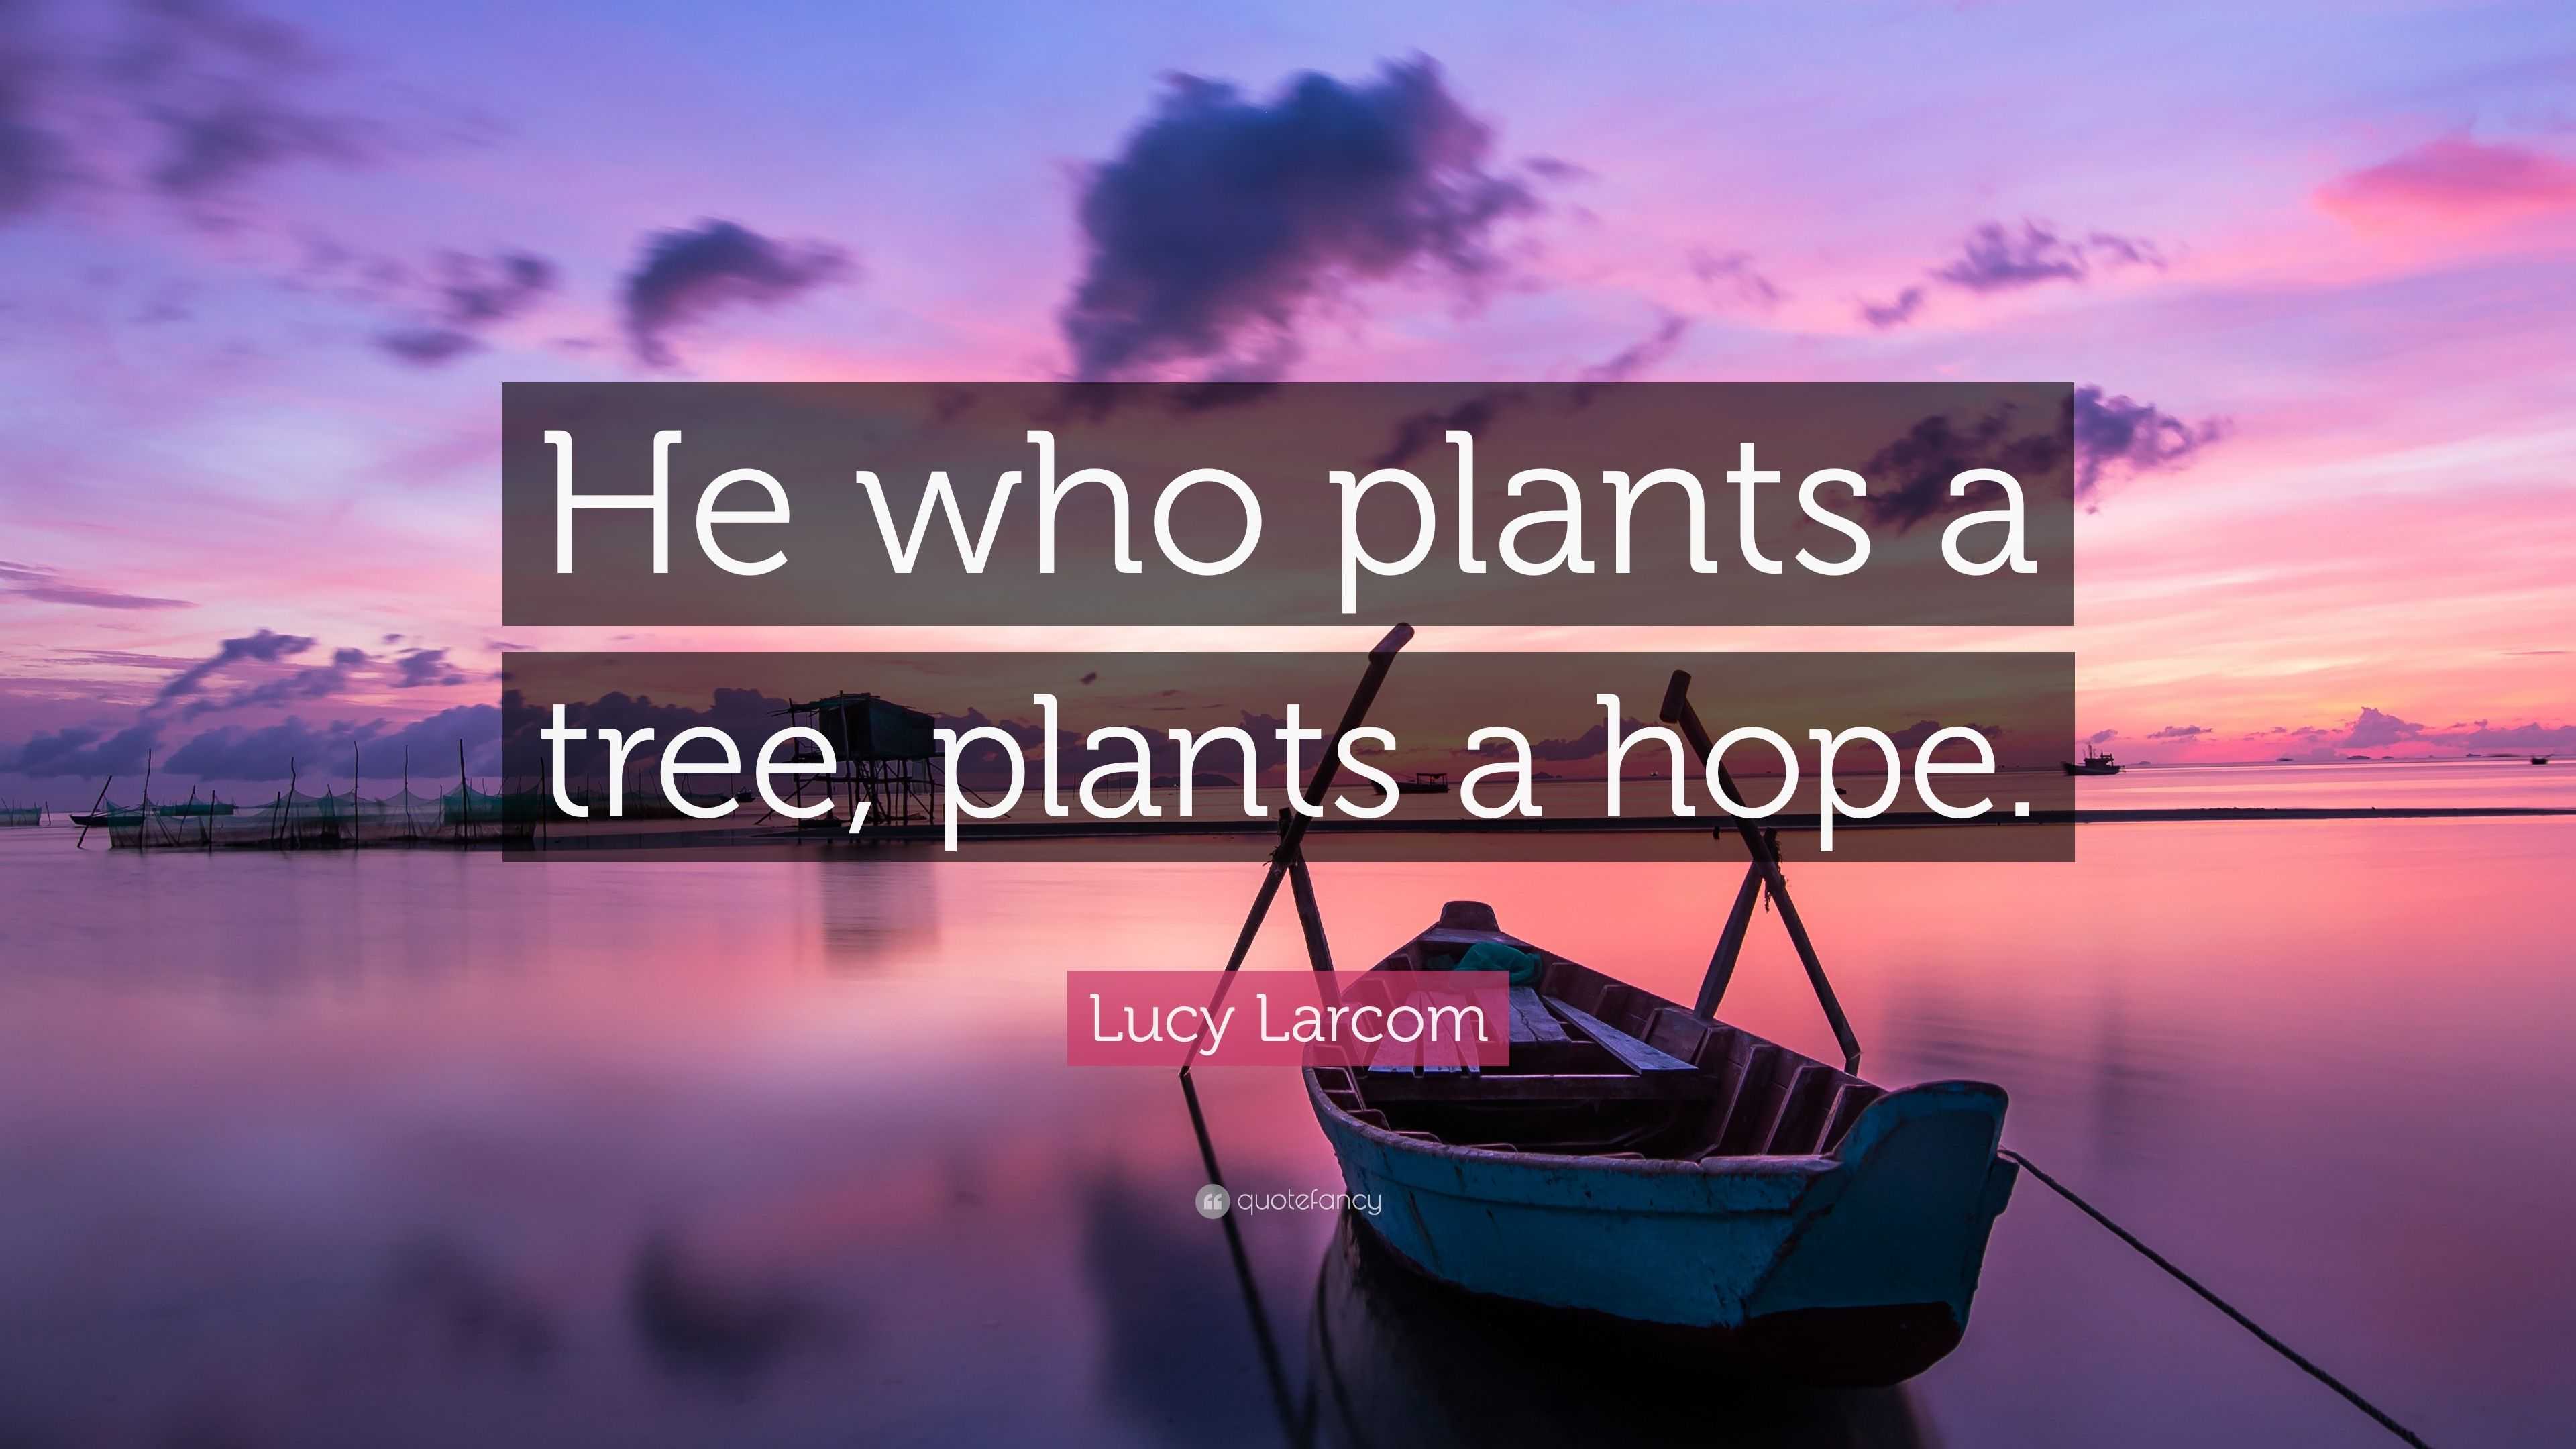 Lucy Larcom Quote: “He who plants a tree, plants a hope.” (7 wallpapers